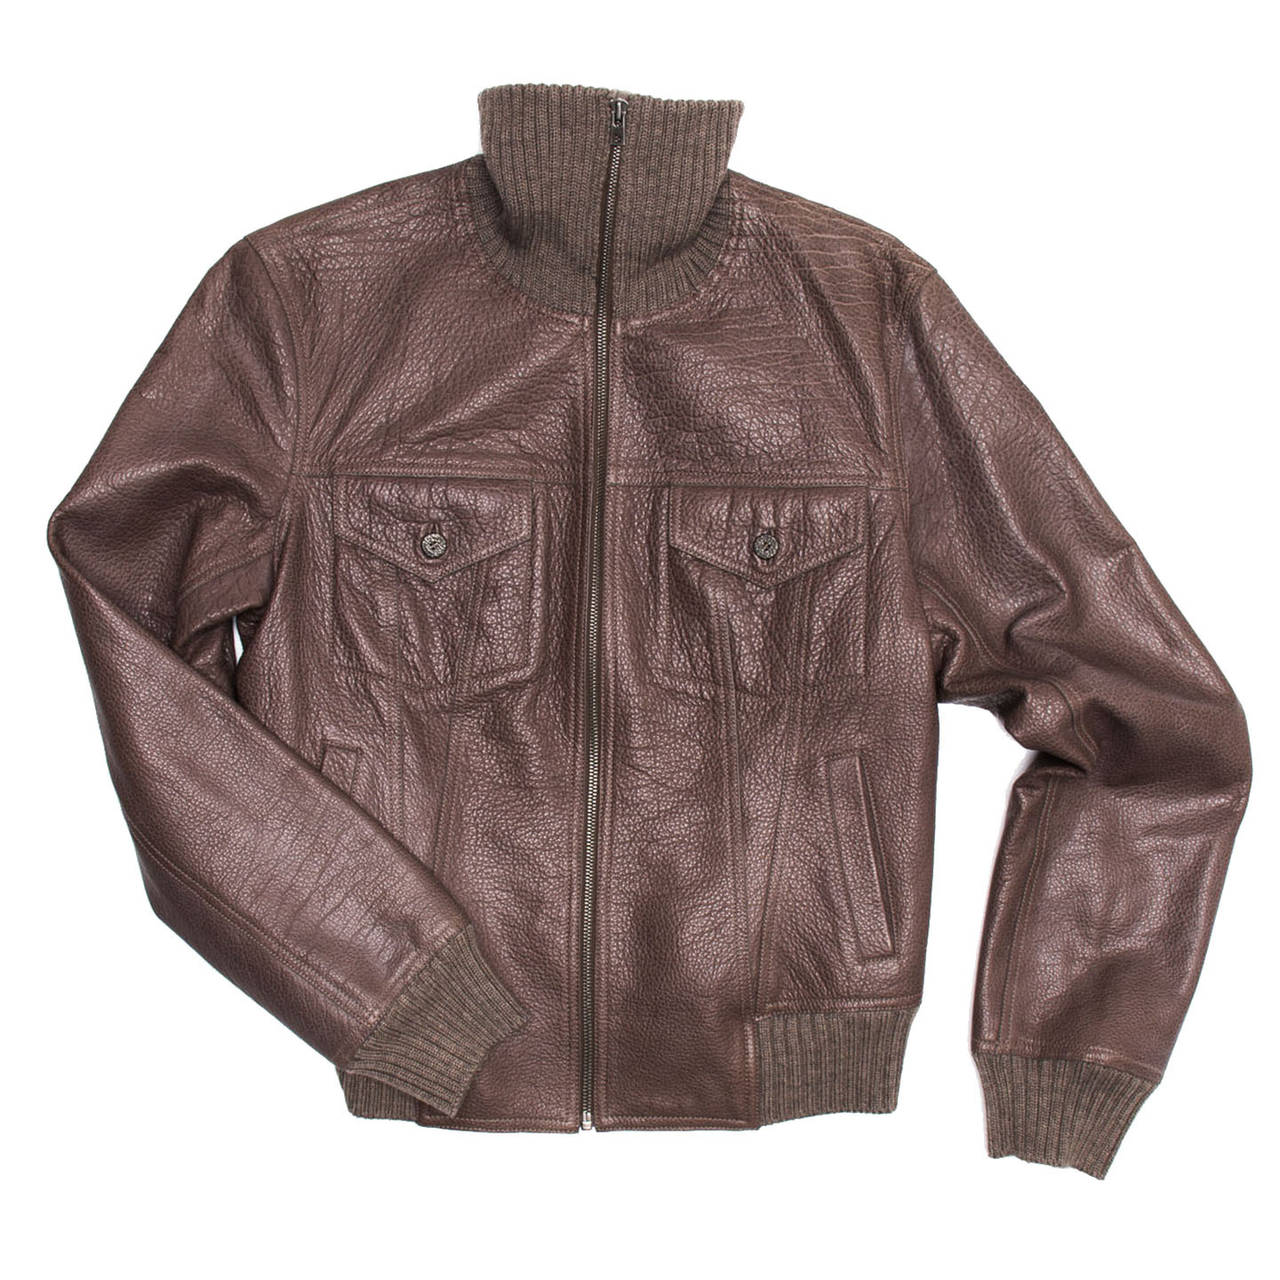 Bison leather classic bomber style jacket with ribbed bands at collar, cuffs and hem. The front is enriched by two flap pockets at bust that fasten with dark little buttons and slash pockets at waist. All the reams are decorated by tone-on-tone top